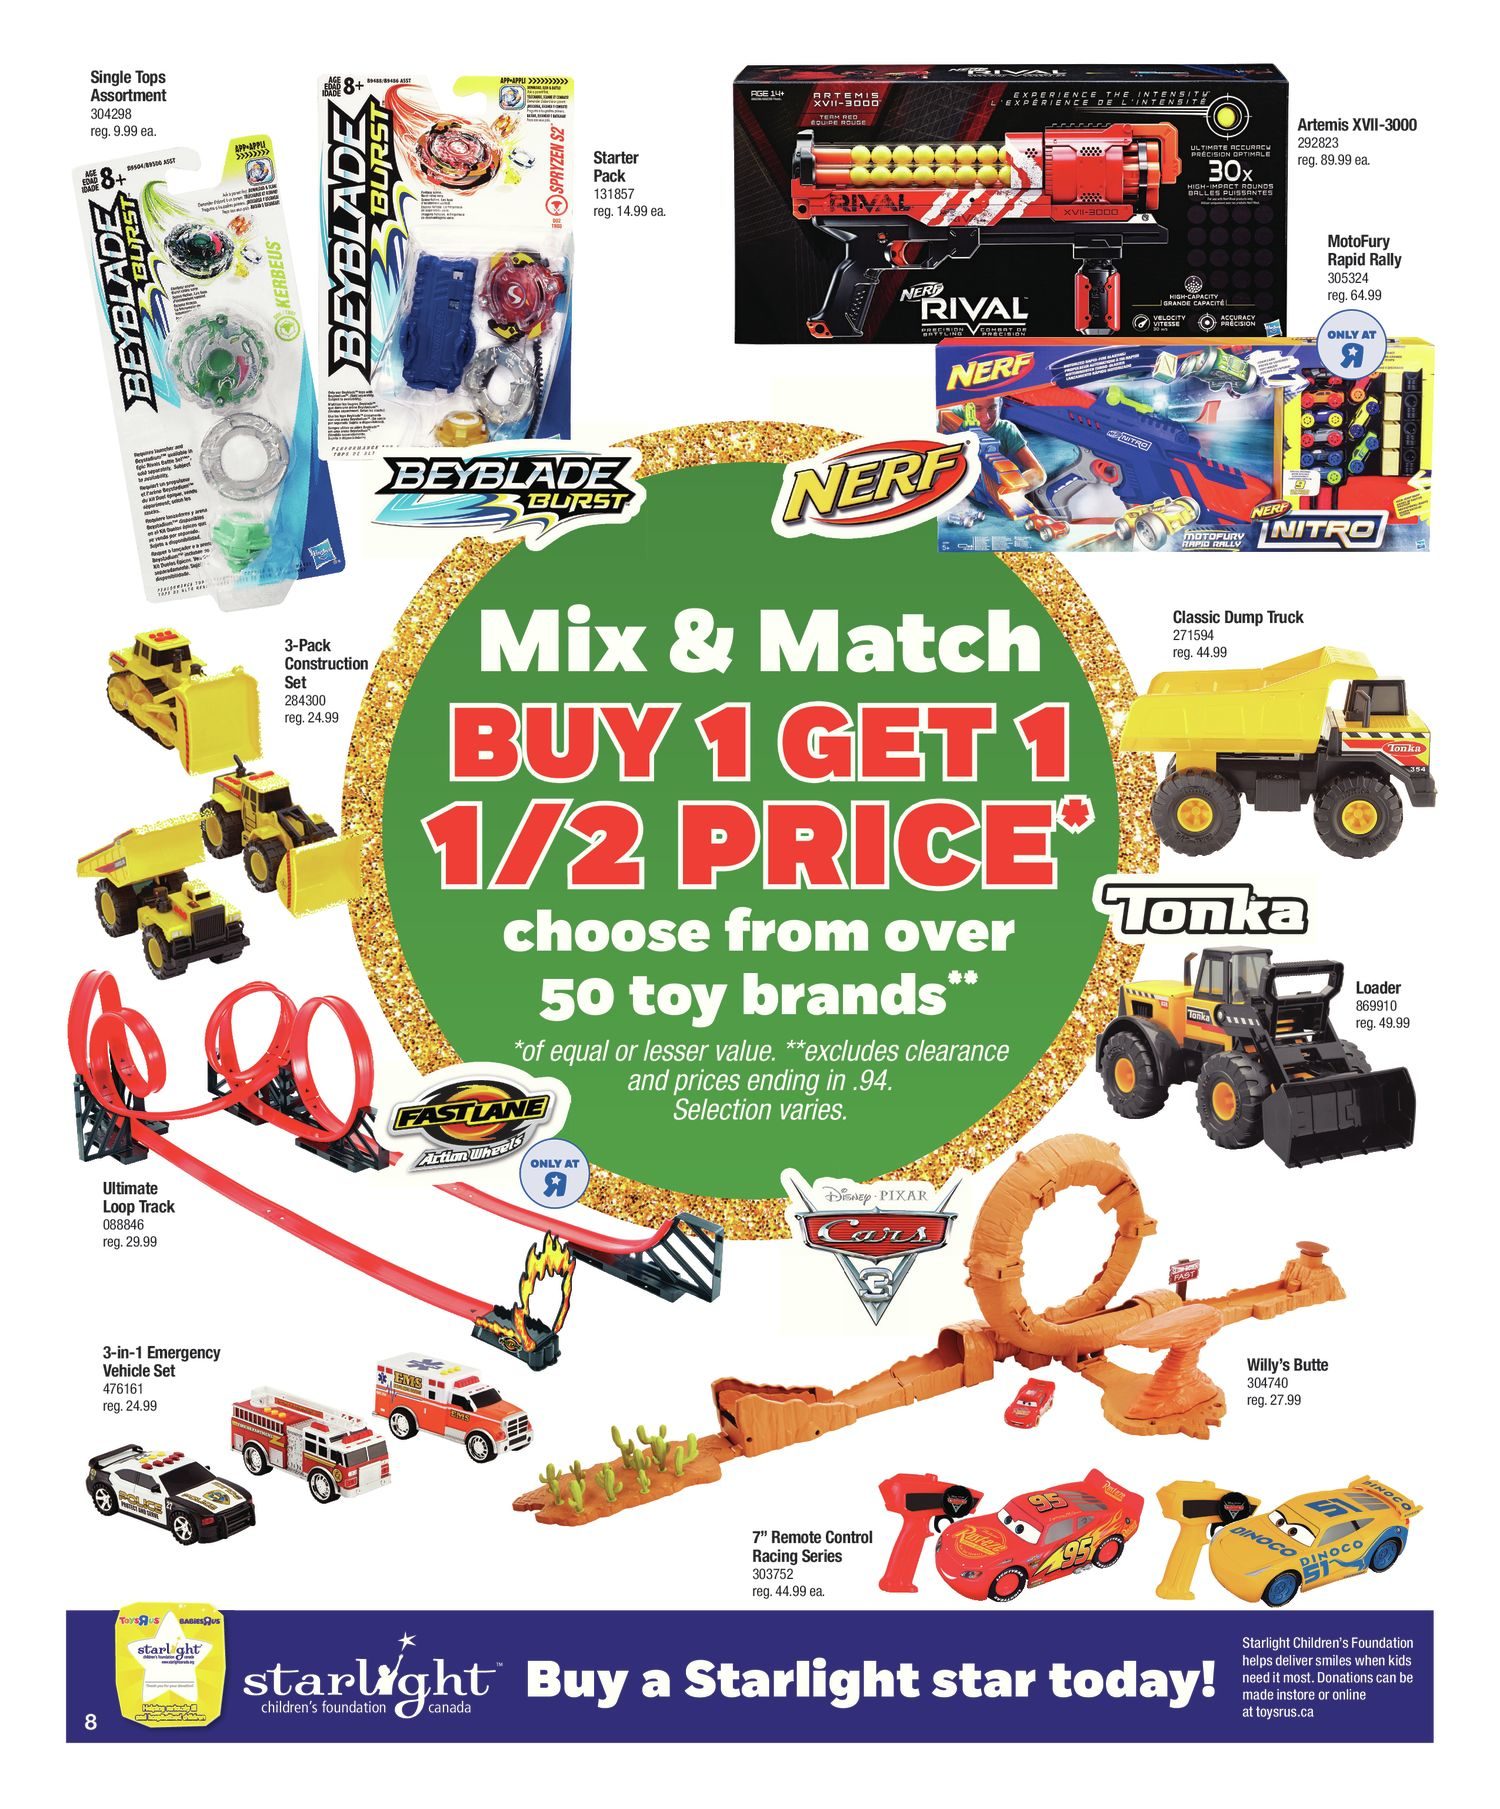 Toys R Us Weekly Flyer Weekly Mix Match Dec 15 21 - roblox core figure pack assortment mr toys toyworld